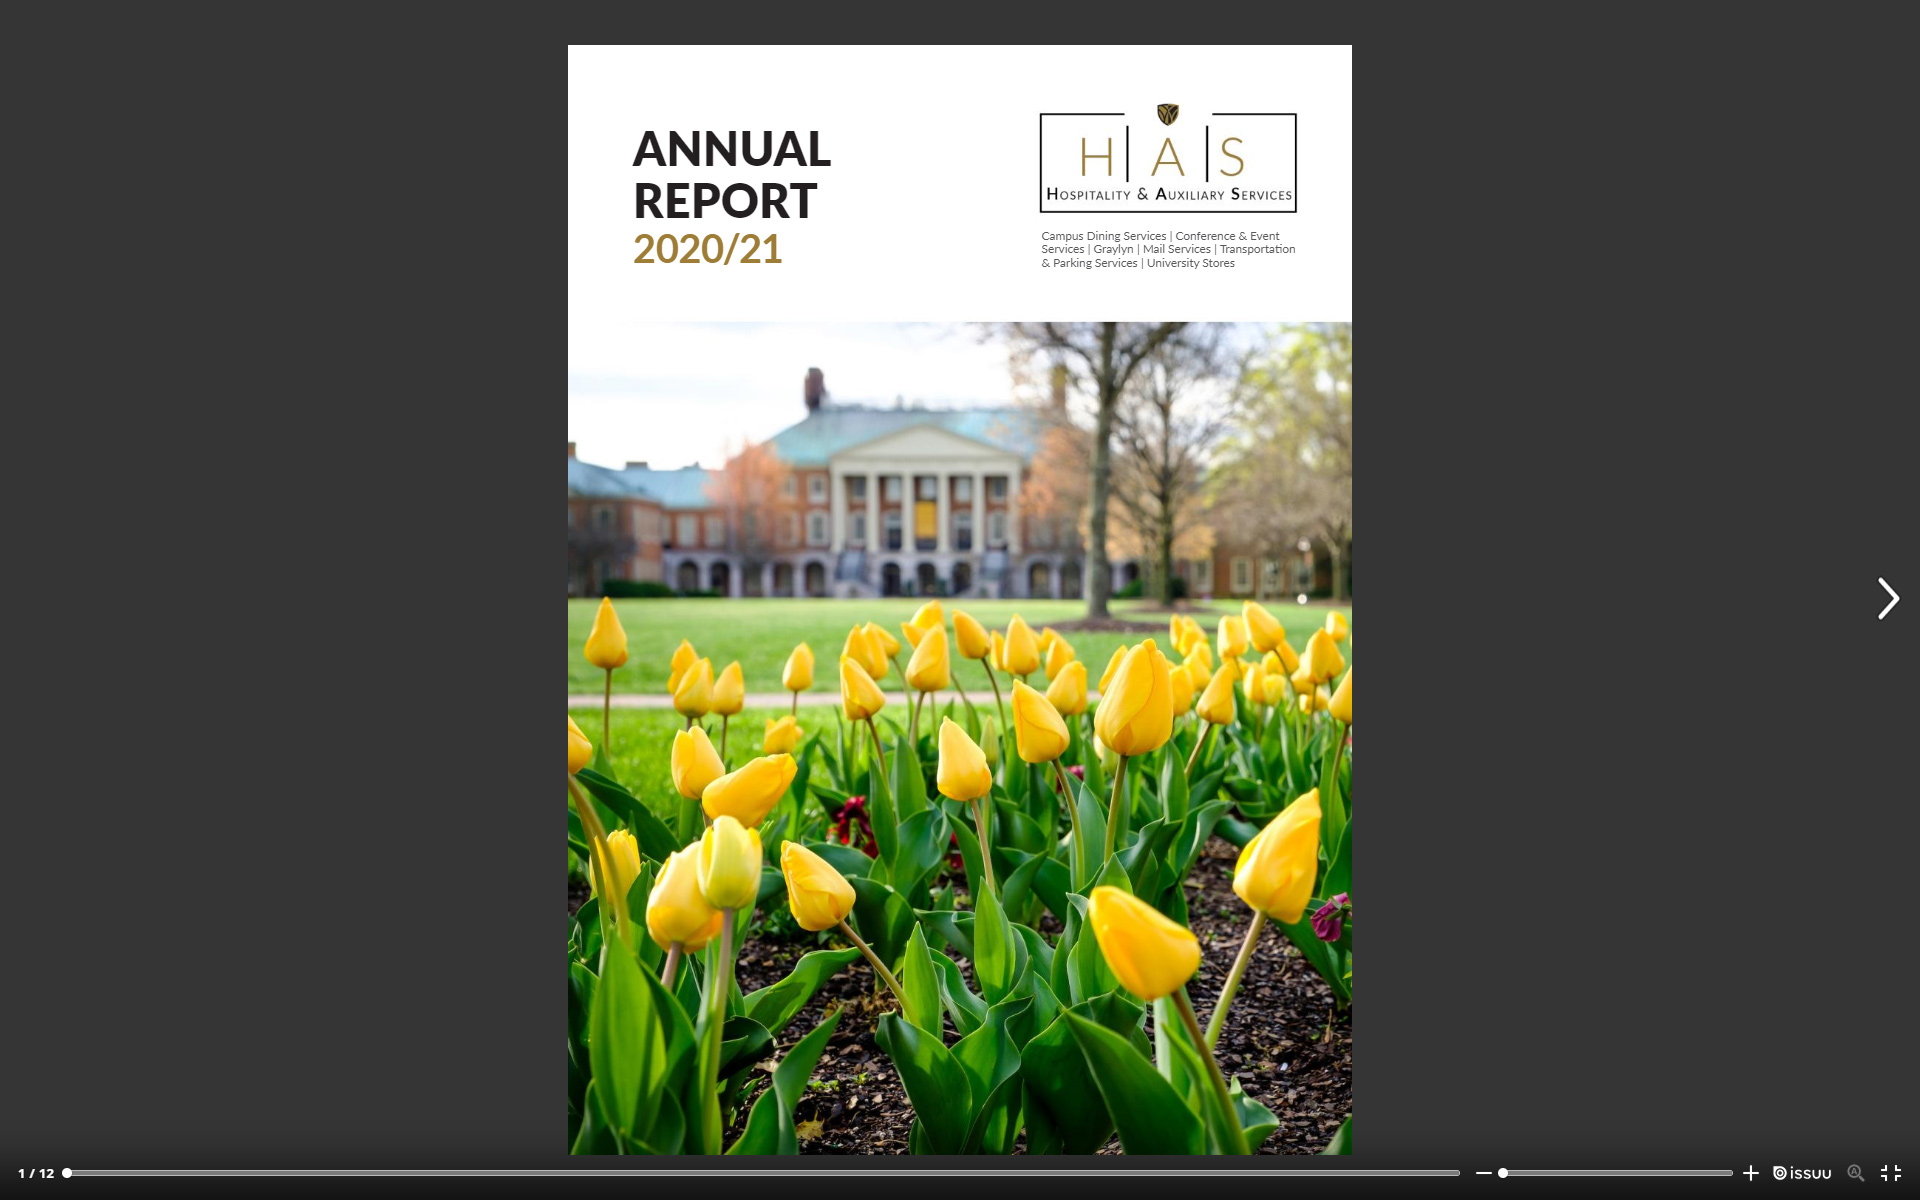 Screenshot of the Annual Report Printed Cover